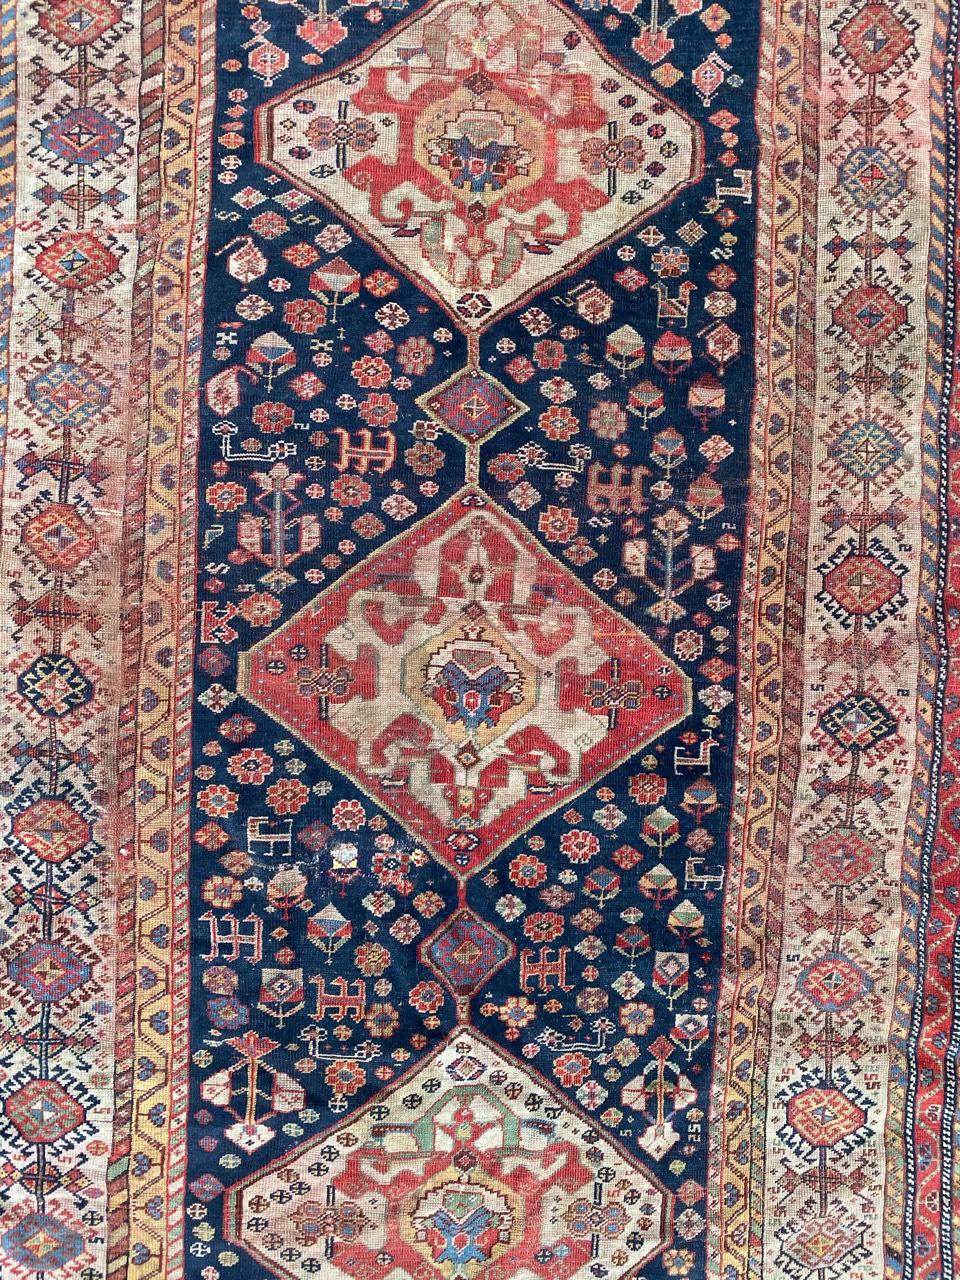 Very beautiful late 19th century rug with tribal geometrical design and nice natural colors with red, blue, green and yellow, entirely and finely hand knotted with wool velvet on wool foundation.

✨✨✨
